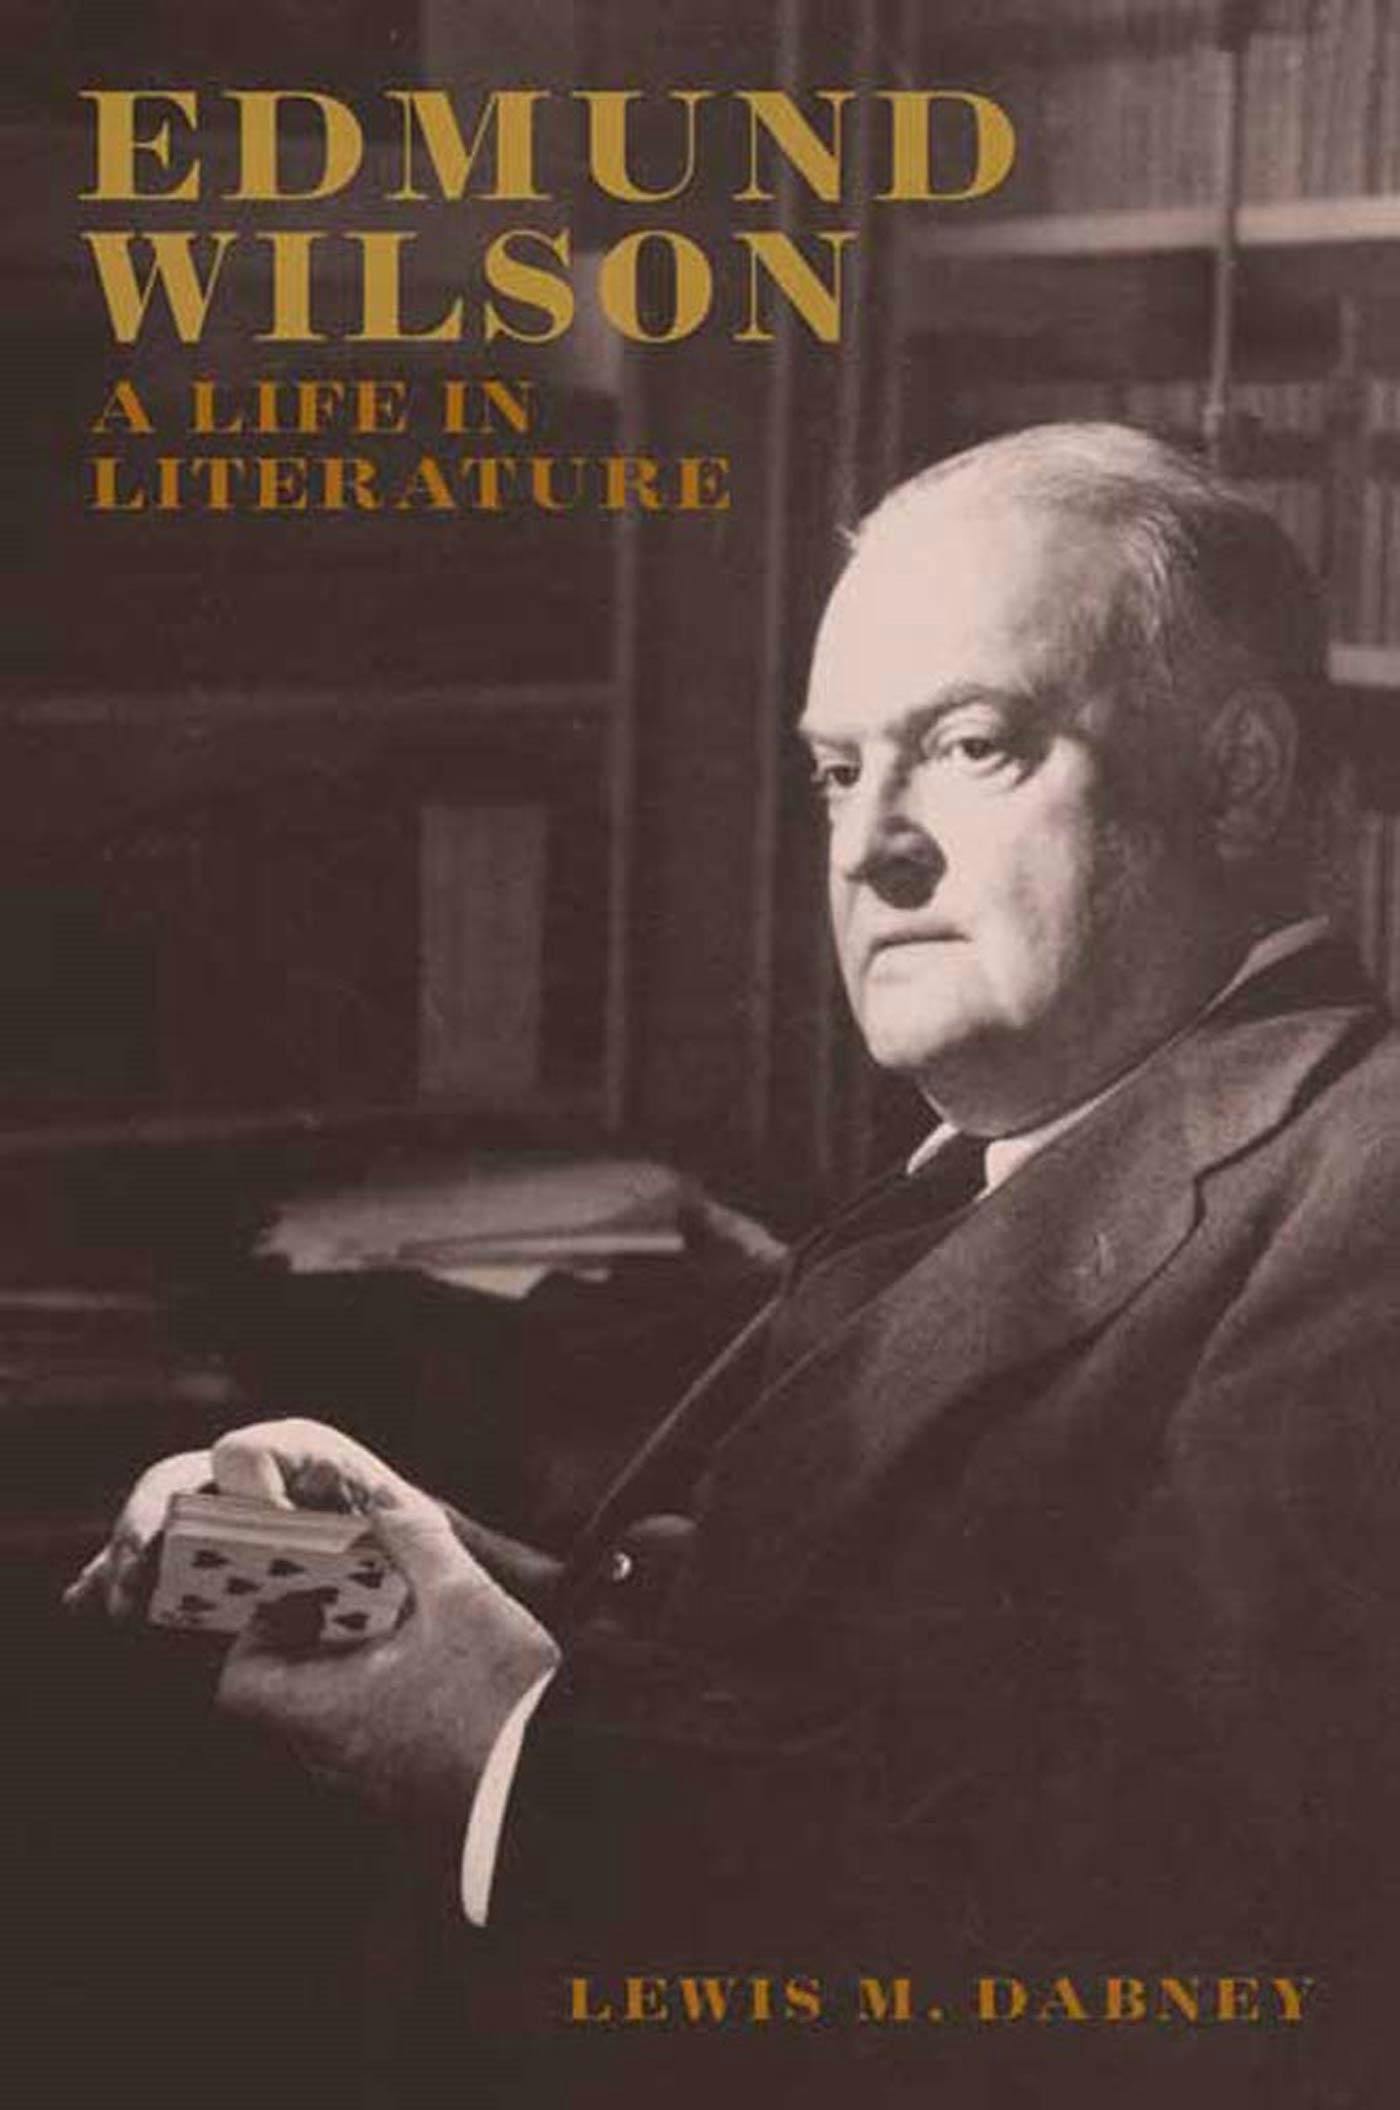 To the Finland Station by Edmund Wilson